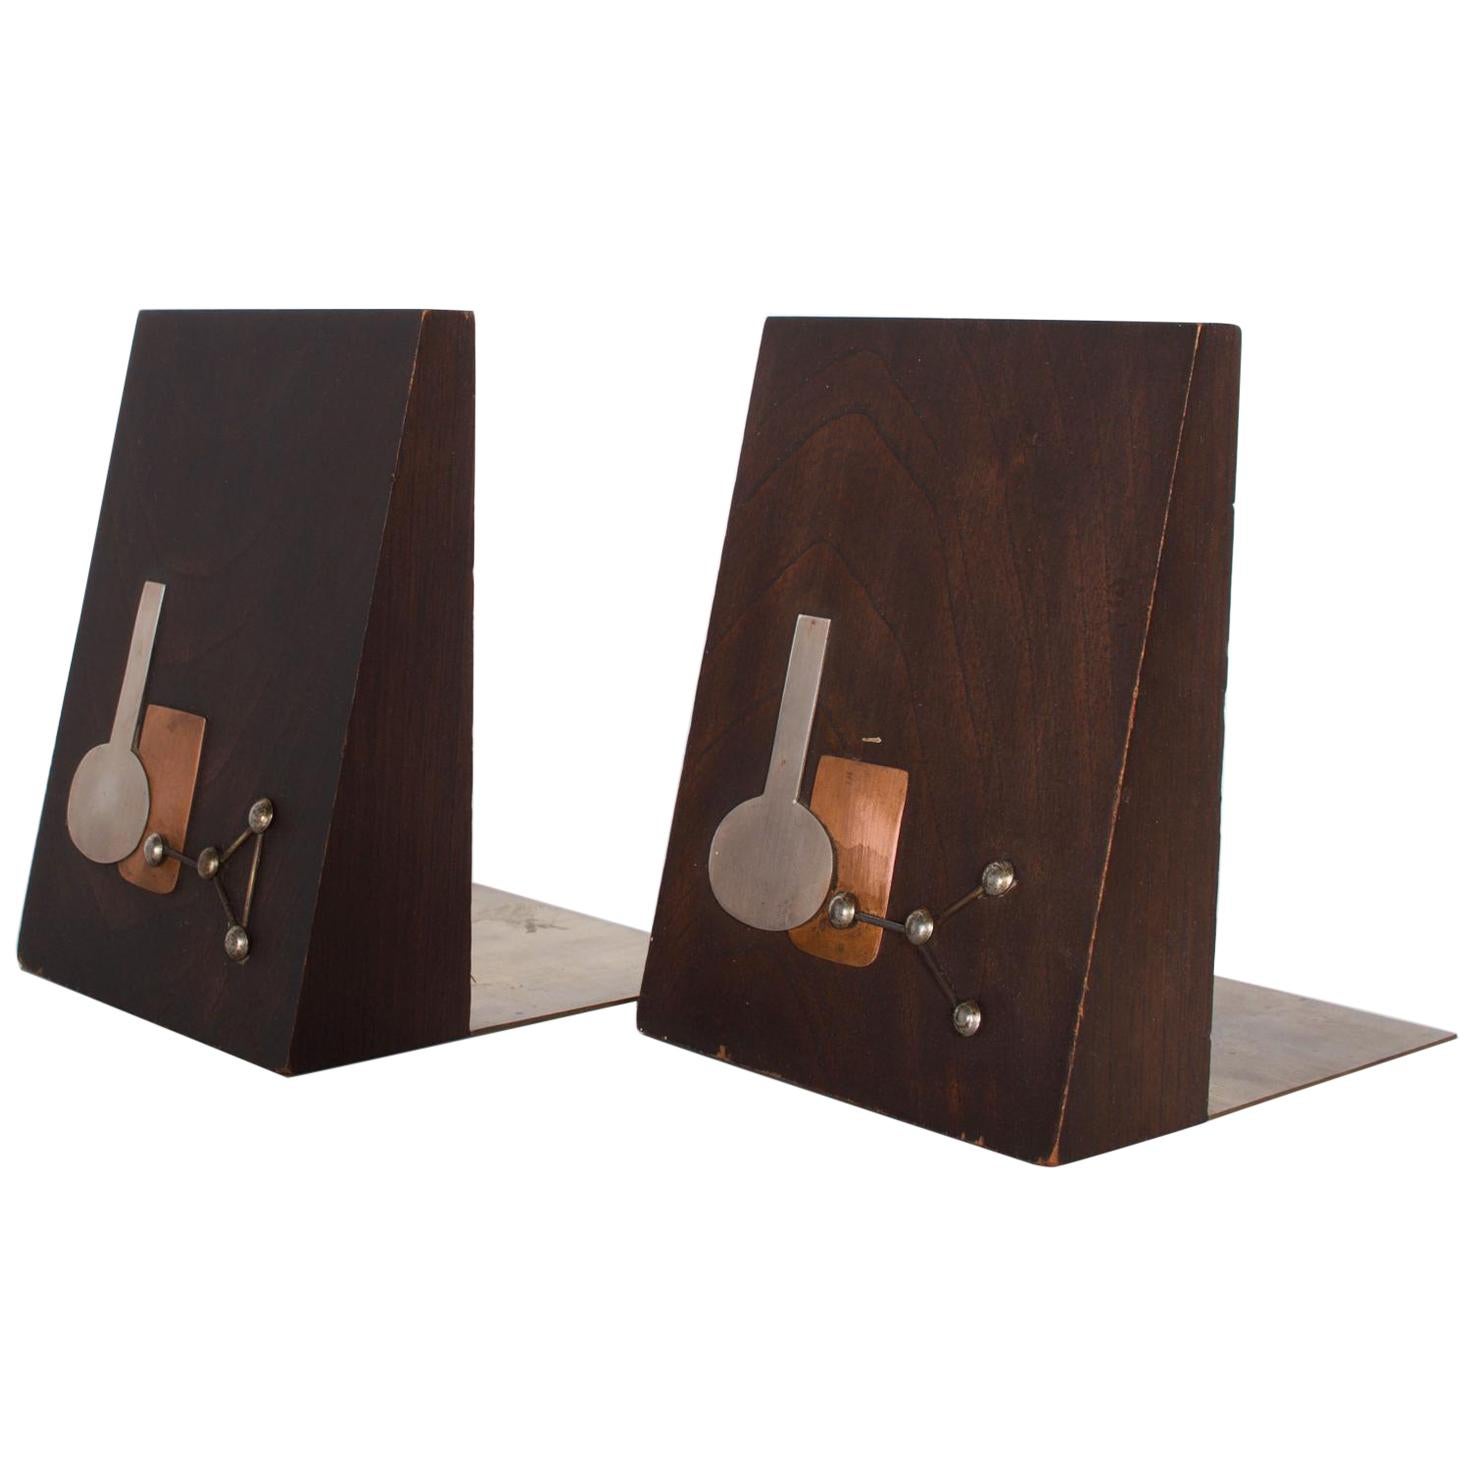 AMBIANIC presents
pair of Bookends, Mid Century Mexican Modernist.
Unmarked, attributed to Emaus.
Made in Mexico circa the 1970s.
Mahogany, stainless steel, copper.
6.5H x 4.63 W x 5.75 D
Refer to images.